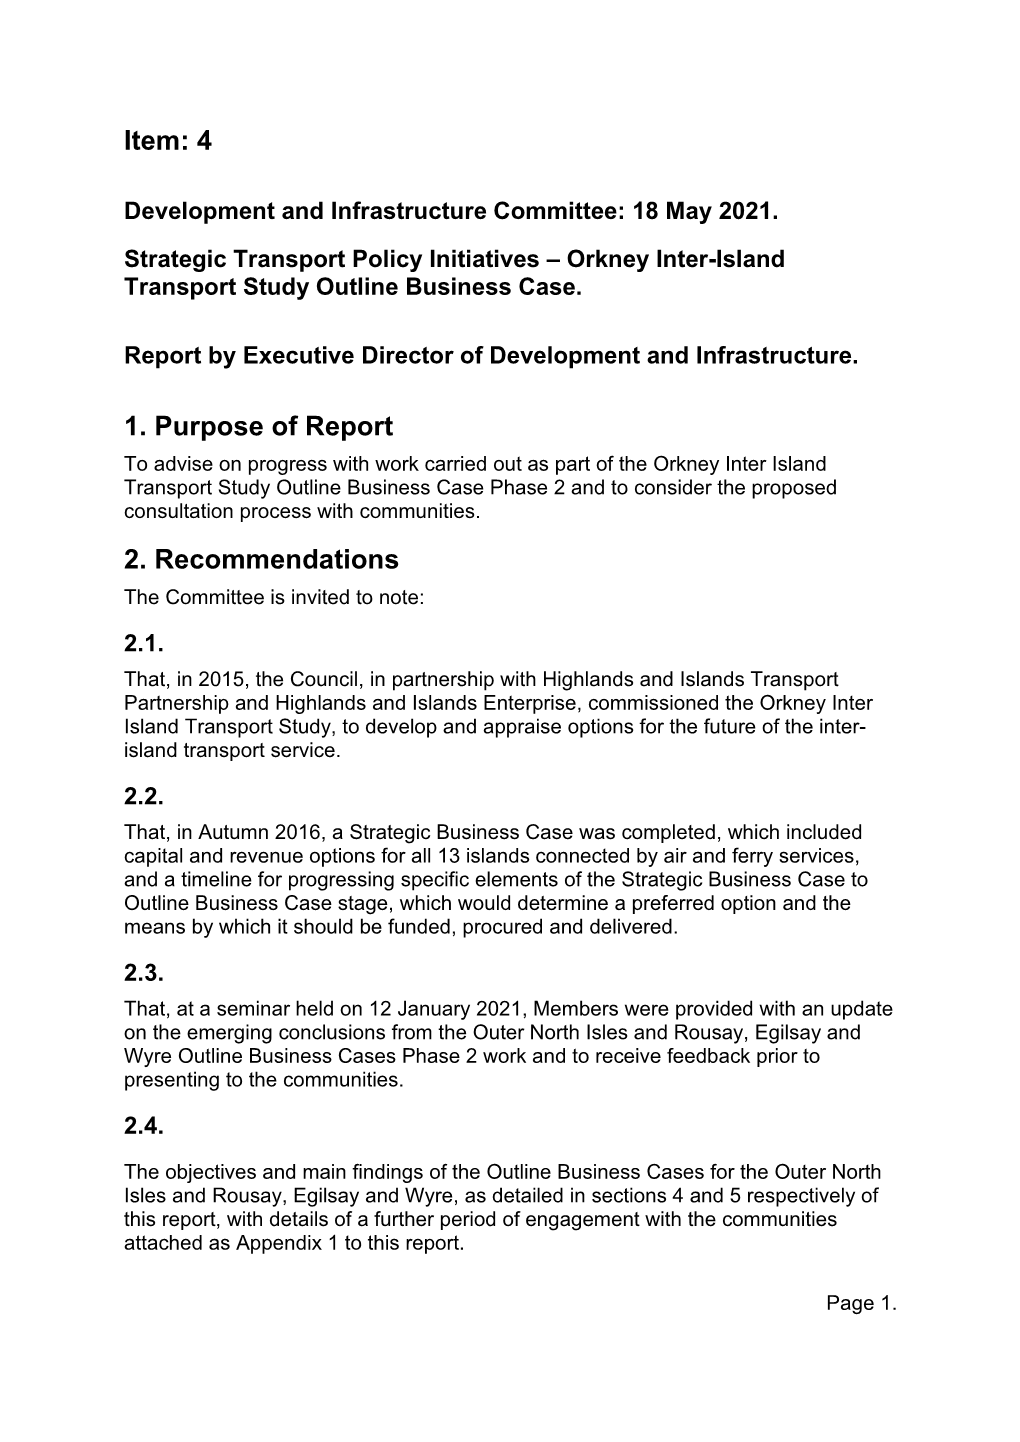 Strategic Transport Policy Initiatives – Orkney Inter-Island Transport Study Outline Business Case